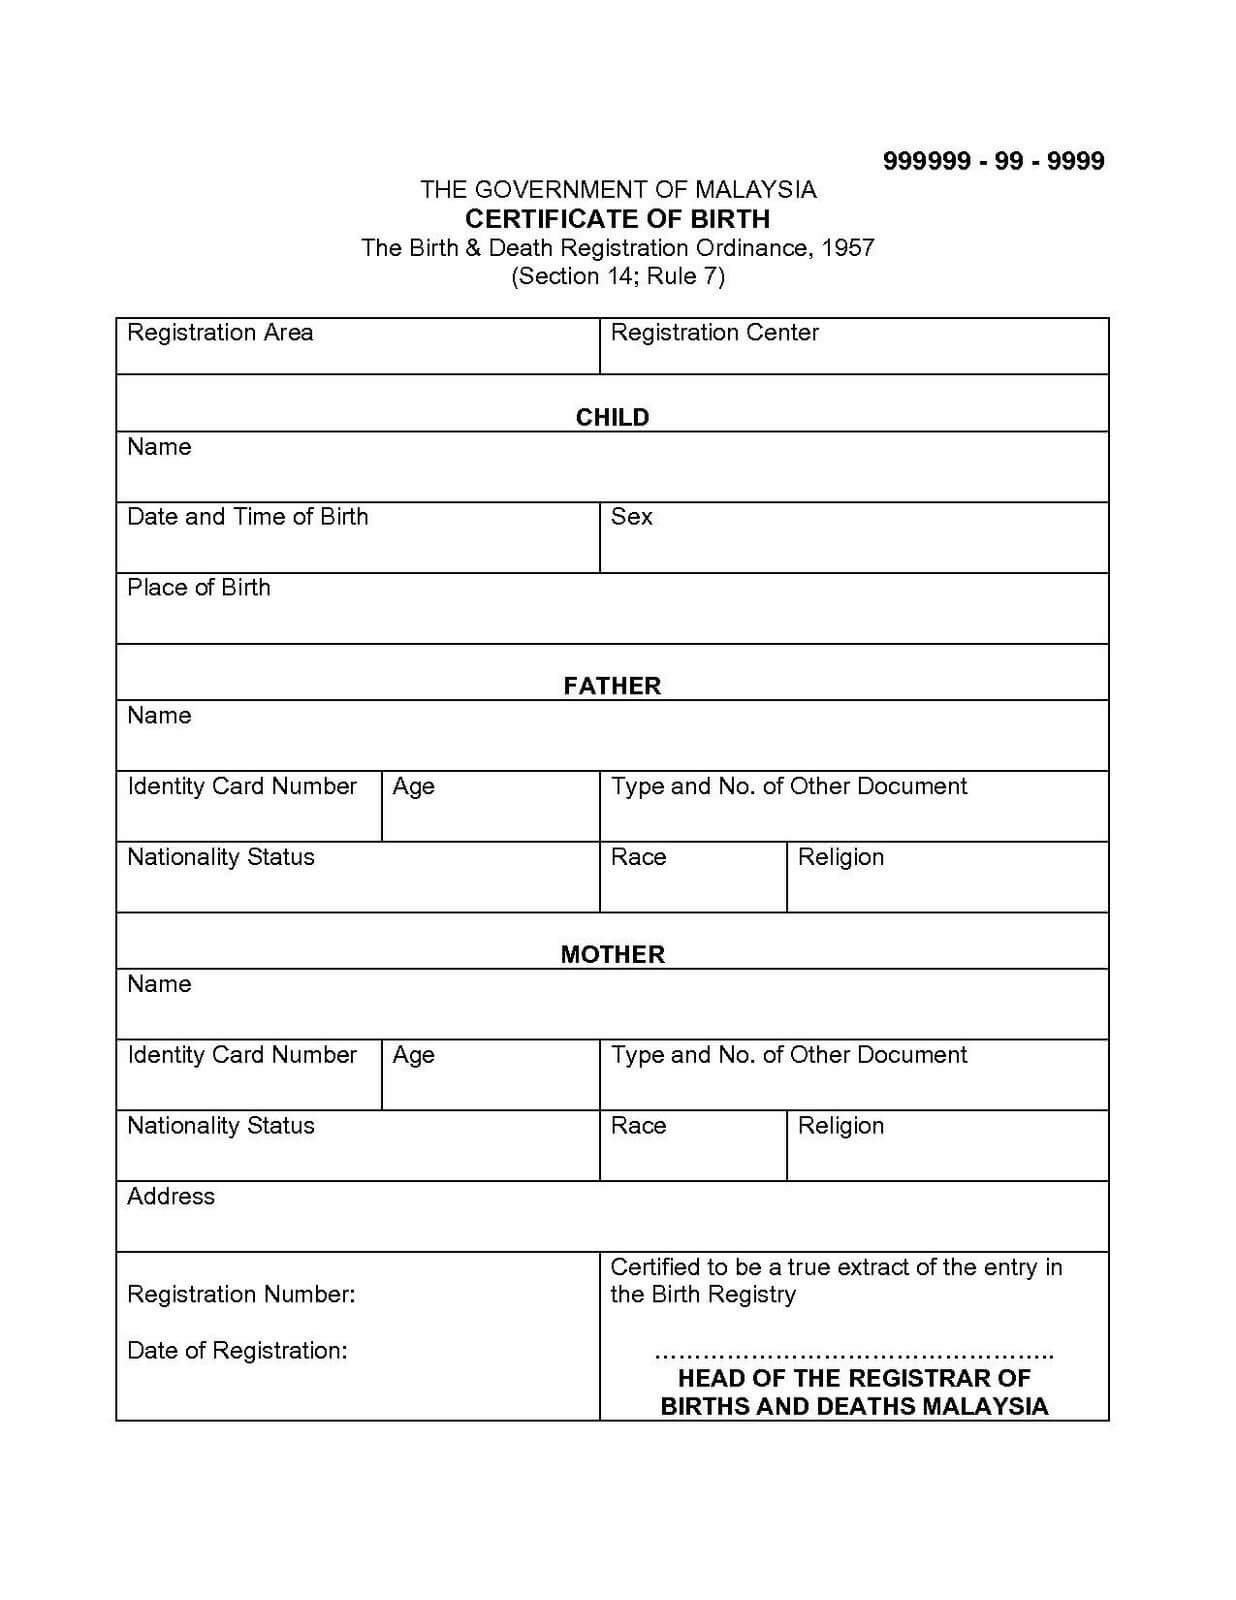 Marriage Certificate Doc Ukran Agdiffusion Com Translate Pertaining To Marriage Certificate Translation From Spanish To English Template